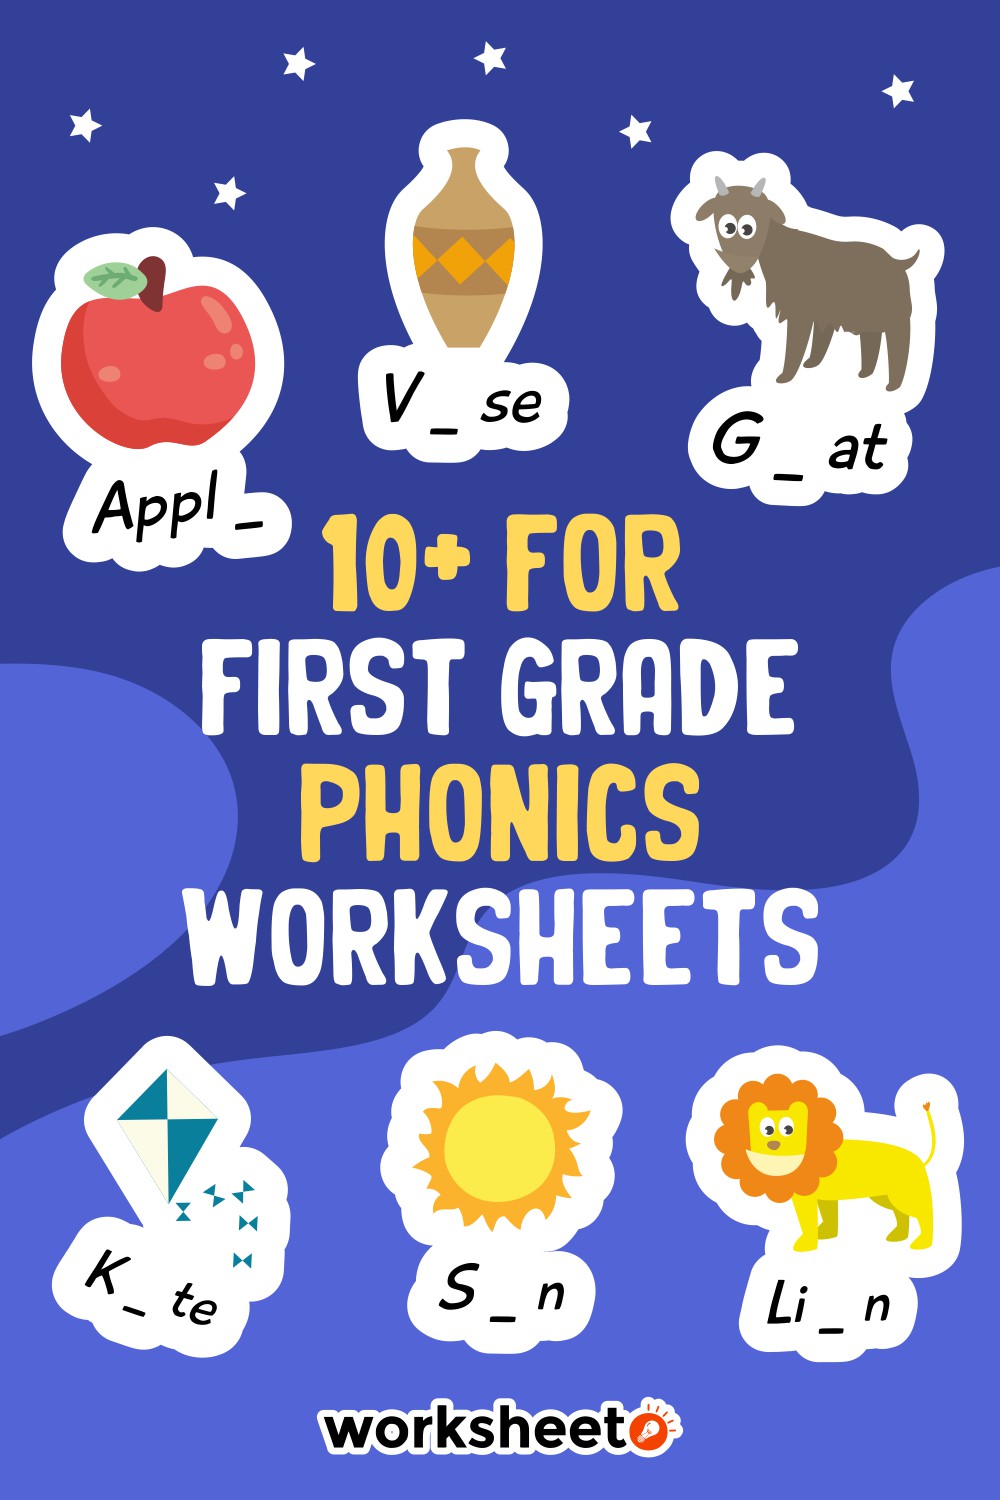 For First Grade Phonics Worksheets